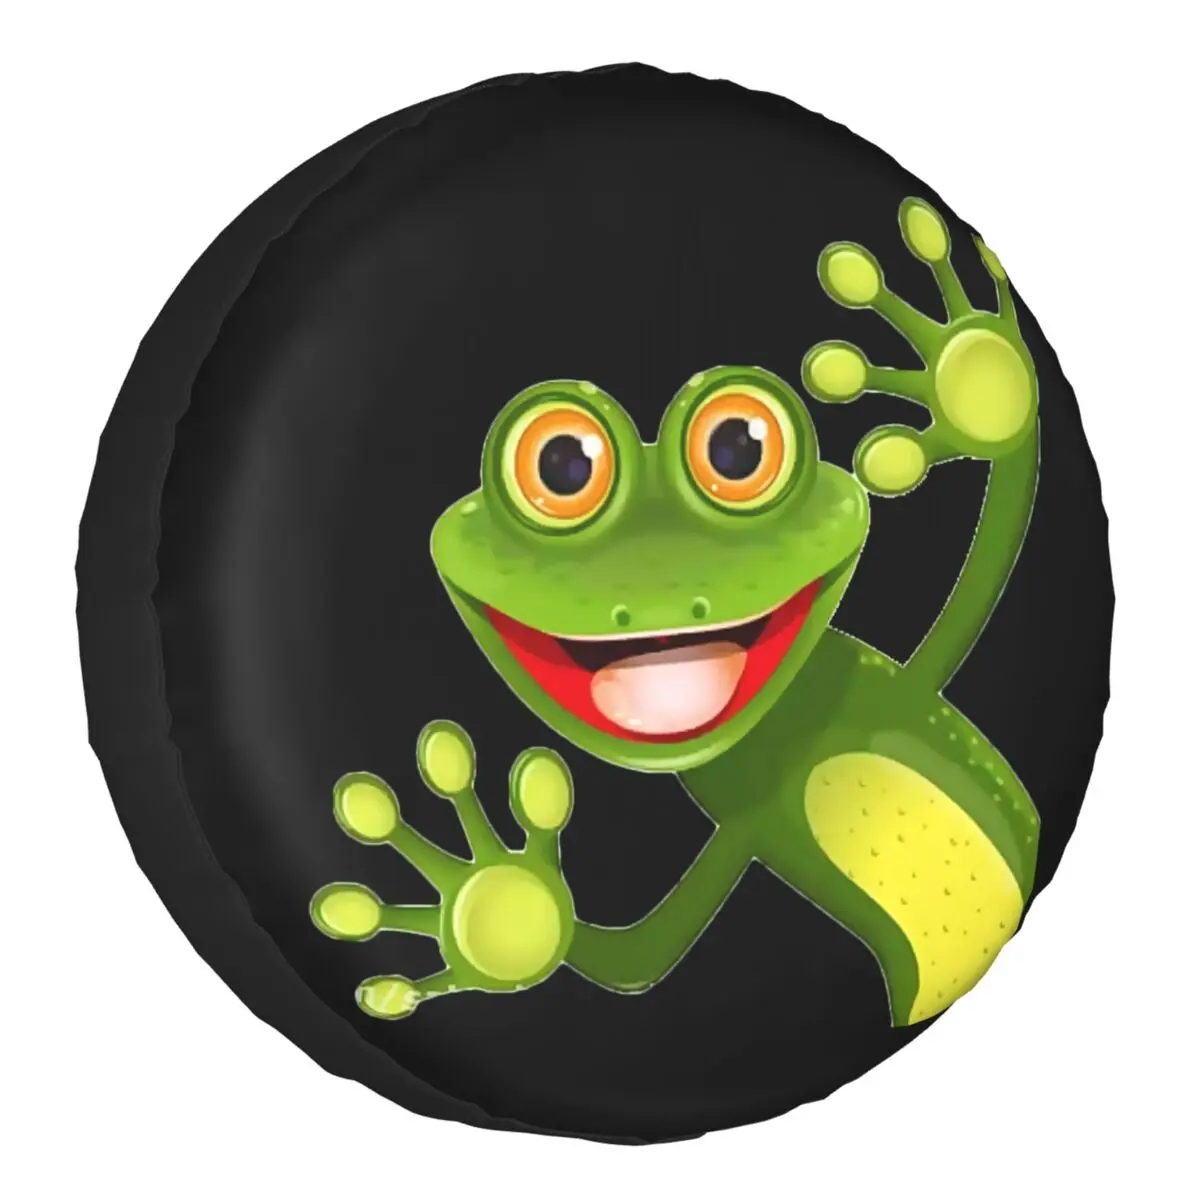 Funny Cartoon Frog Smile Tire Cover 4WD 4x4 RV Anime Spare Wheel Protector for Jeep Toyota Mitsubishi 14